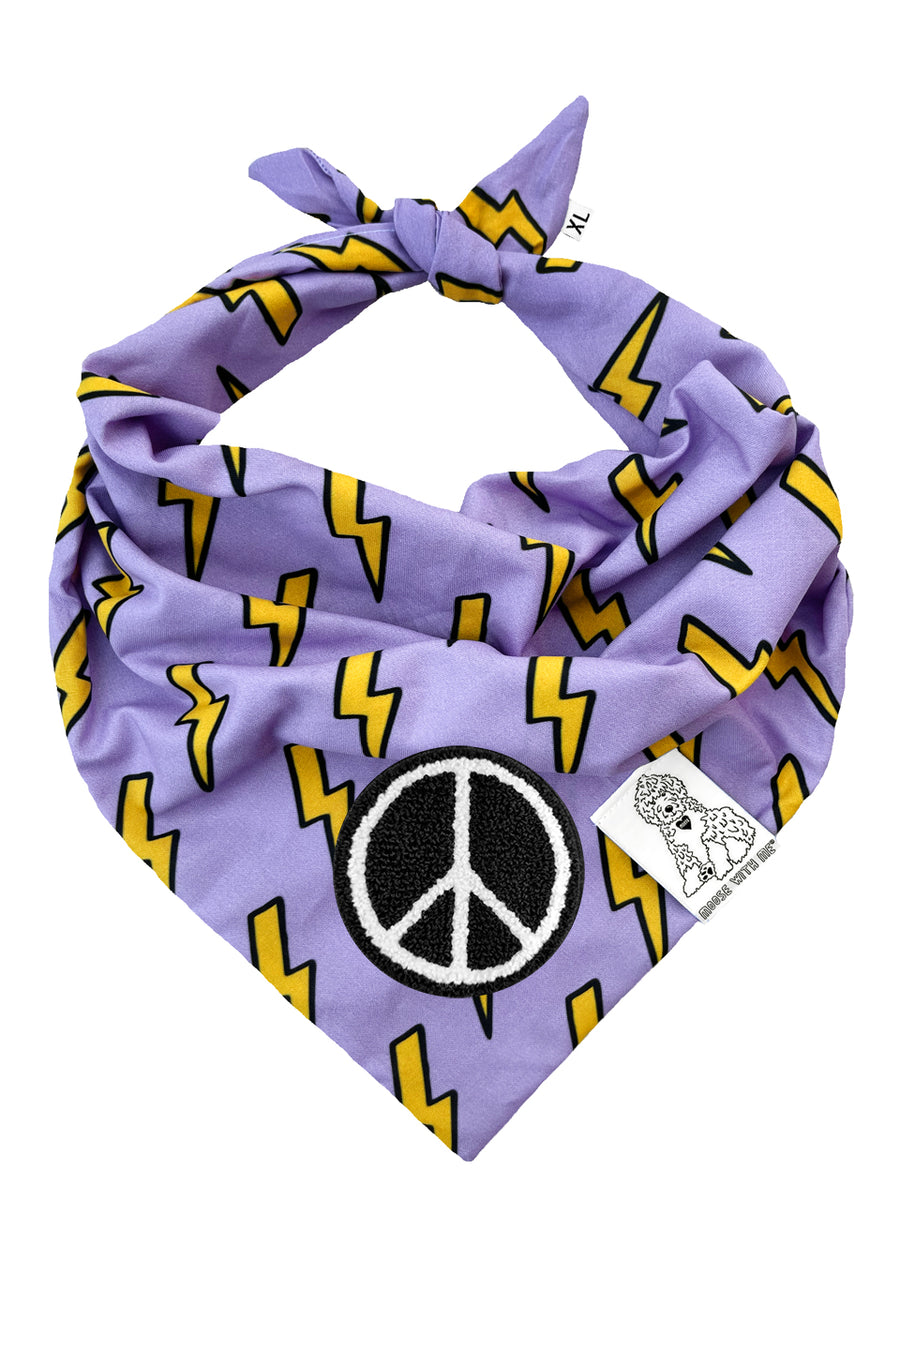 Dog Bandana Bolts - Customize with Interchangeable Velcro Patches